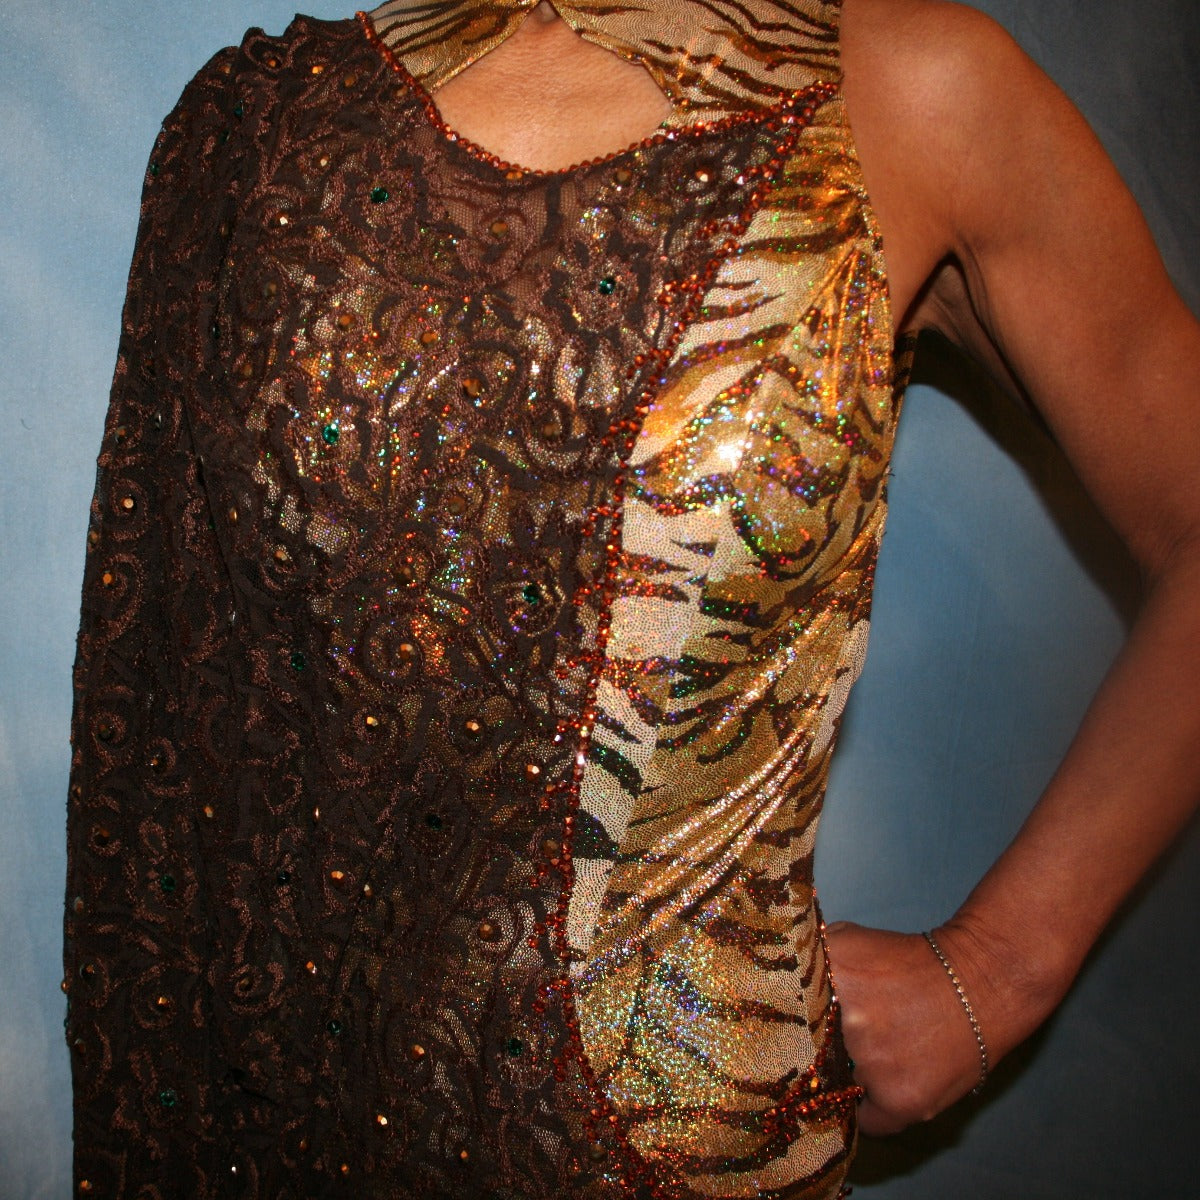 Crystal's Creations close up view of Gold tango dress or Latin/rhythm dress created in chocolate brown stretch lace that is lavishly embellished with gold & a touch of emerald green Swarovski rhinestones overlayed & draped over a golden hologram tiger print bodysuit size 3/4-9/10